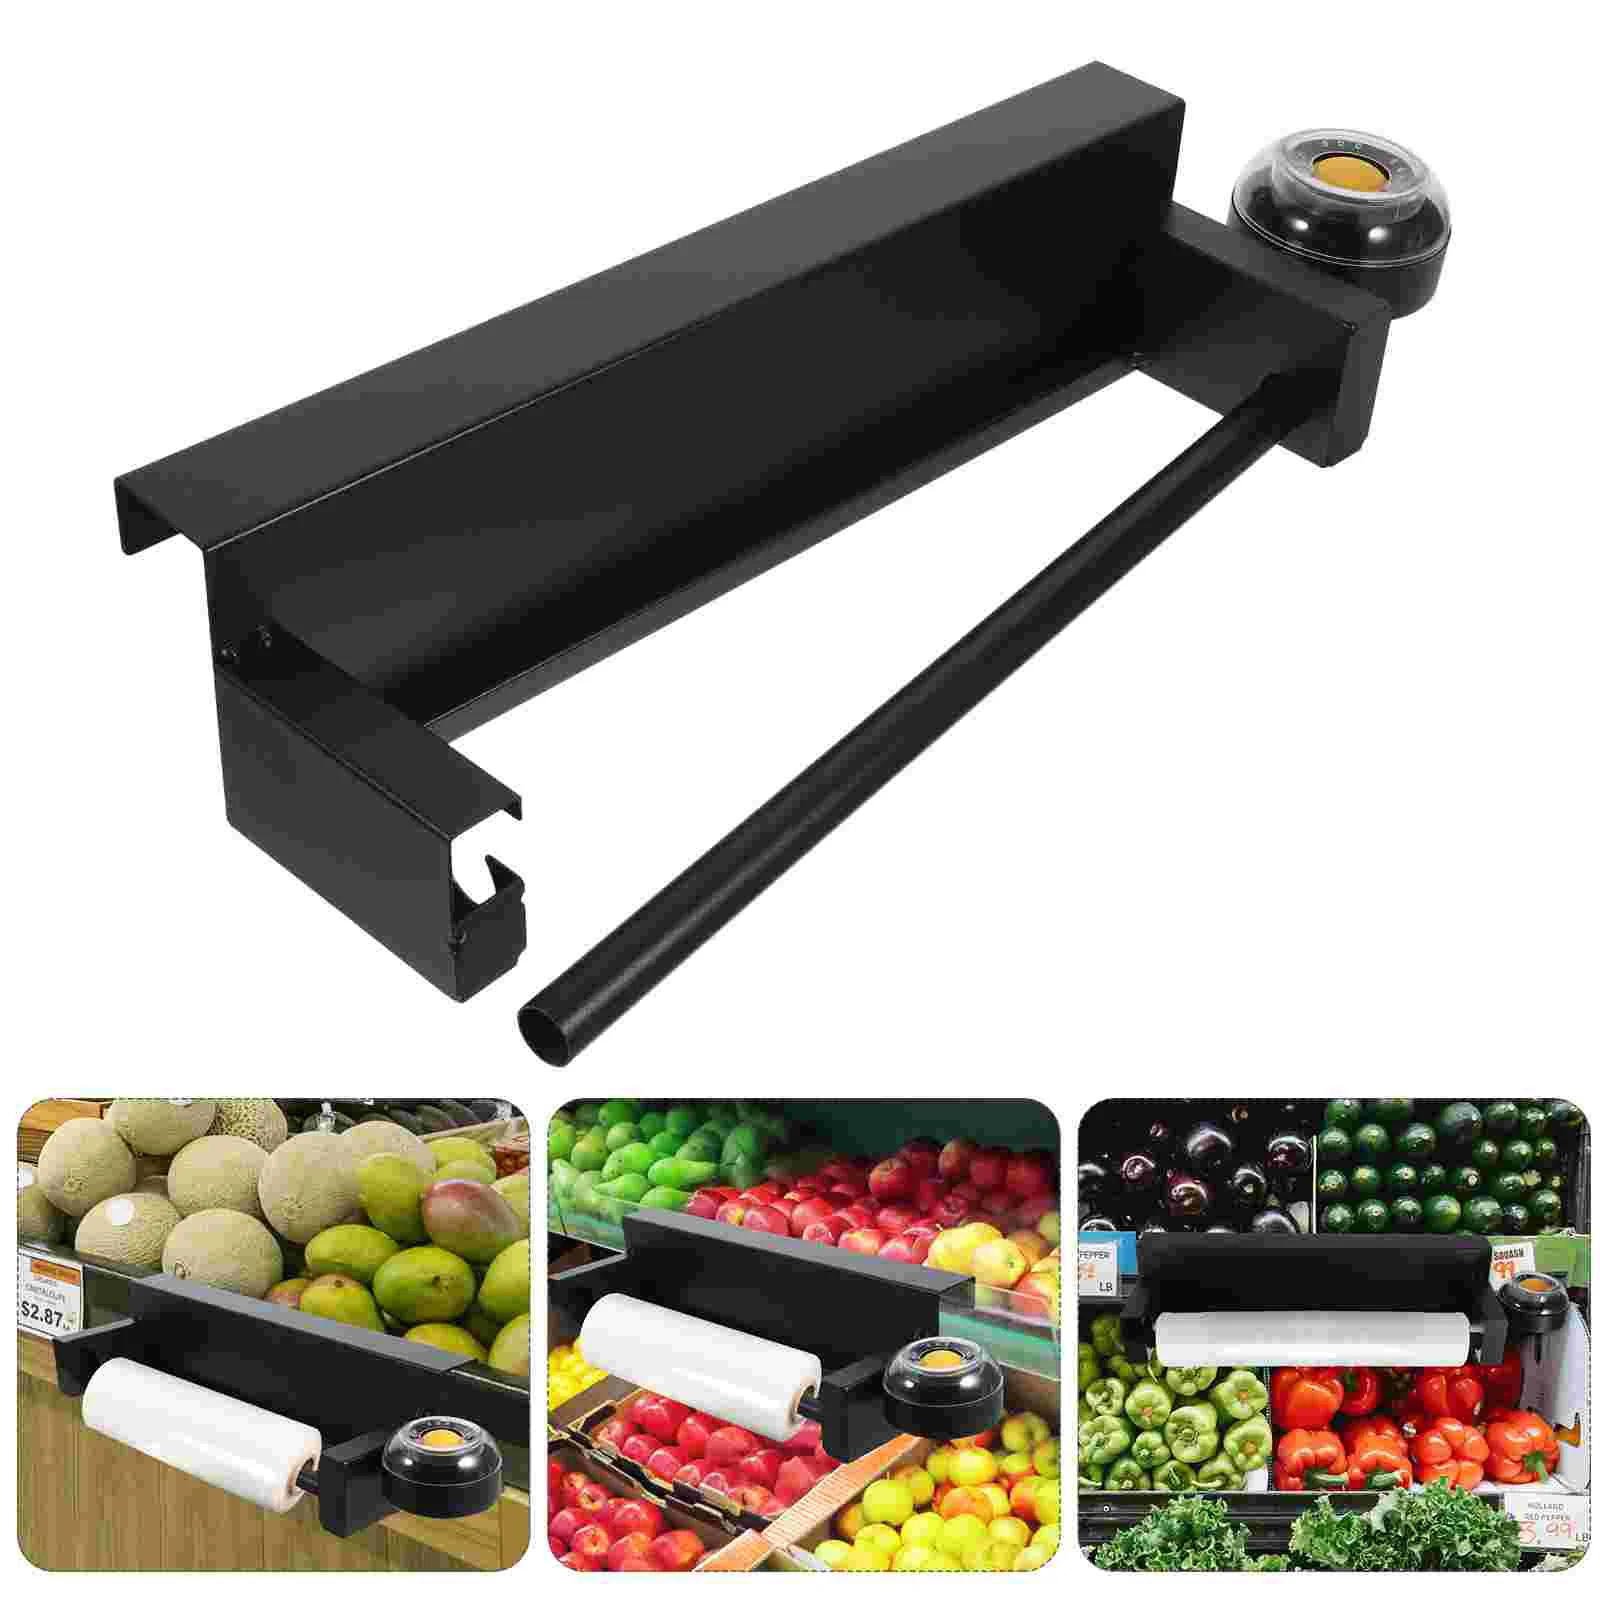 

Supermarket Roll Bag Hanging Grocery Dispenser Wall Mount Produce Holder Stand Door Stainless Steel